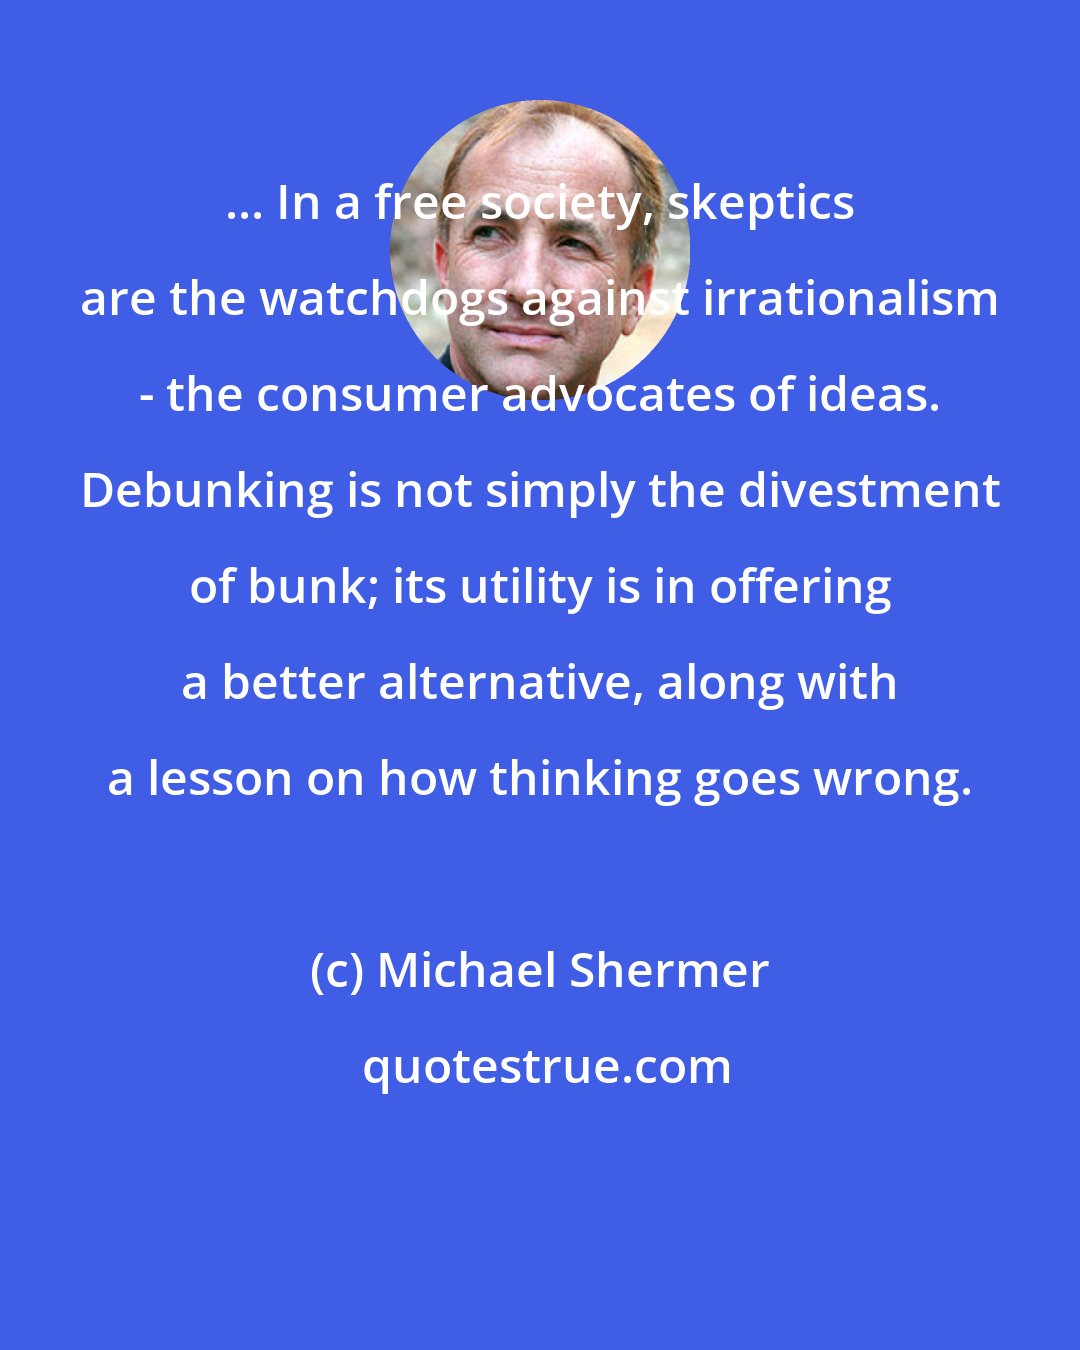 Michael Shermer: ... In a free society, skeptics are the watchdogs against irrationalism - the consumer advocates of ideas. Debunking is not simply the divestment of bunk; its utility is in offering a better alternative, along with a lesson on how thinking goes wrong.